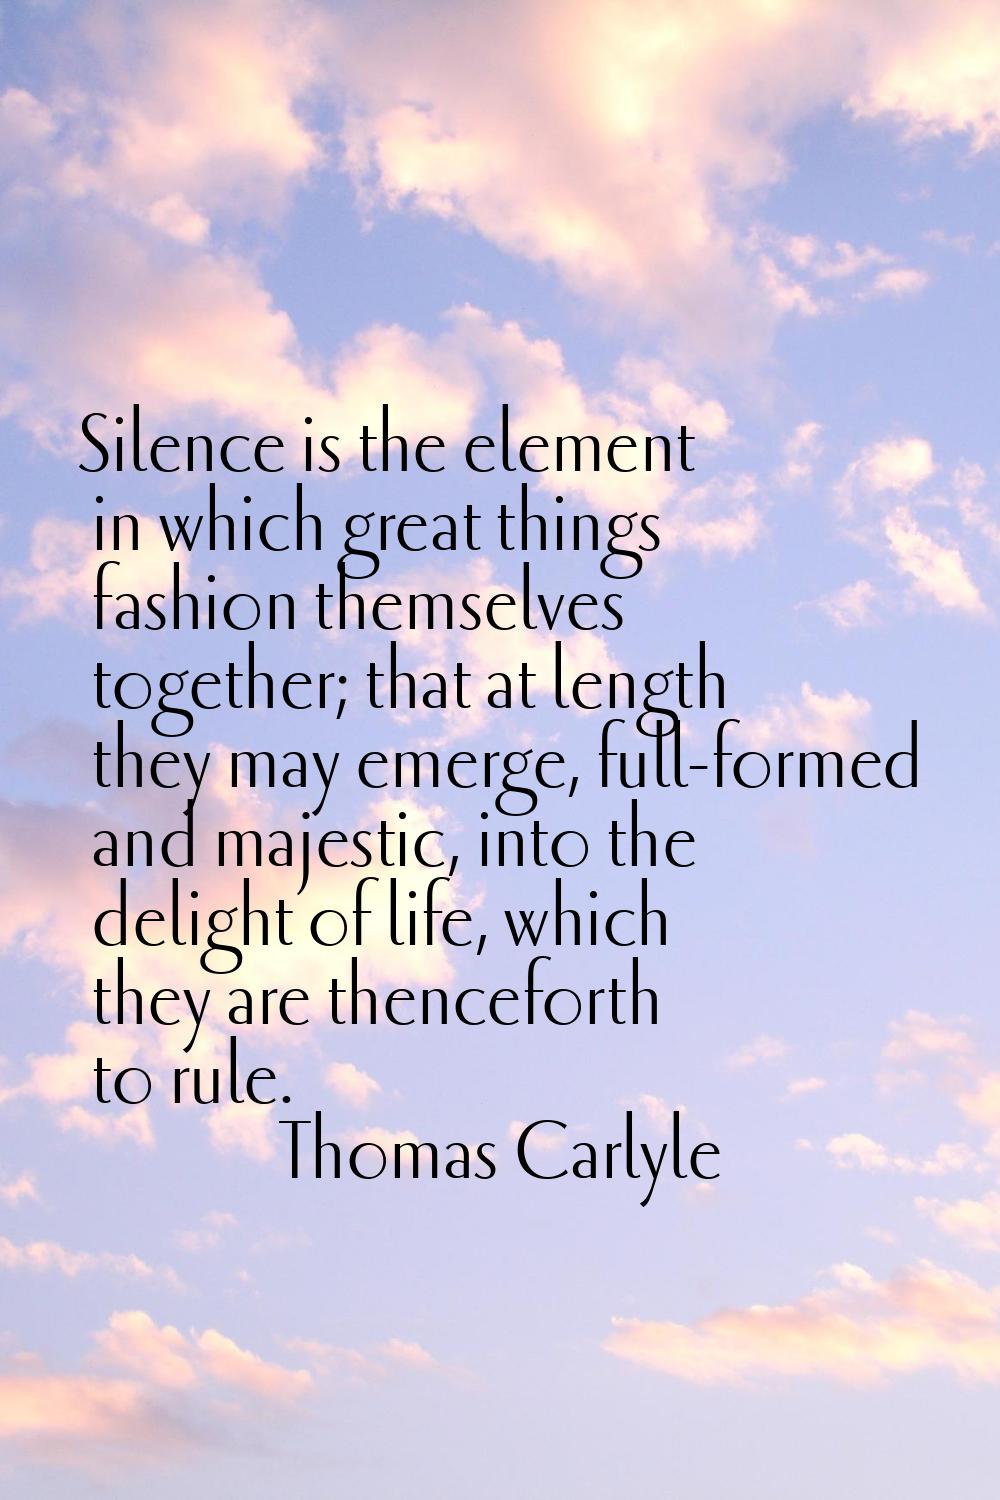 Silence is the element in which great things fashion themselves together; that at length they may e